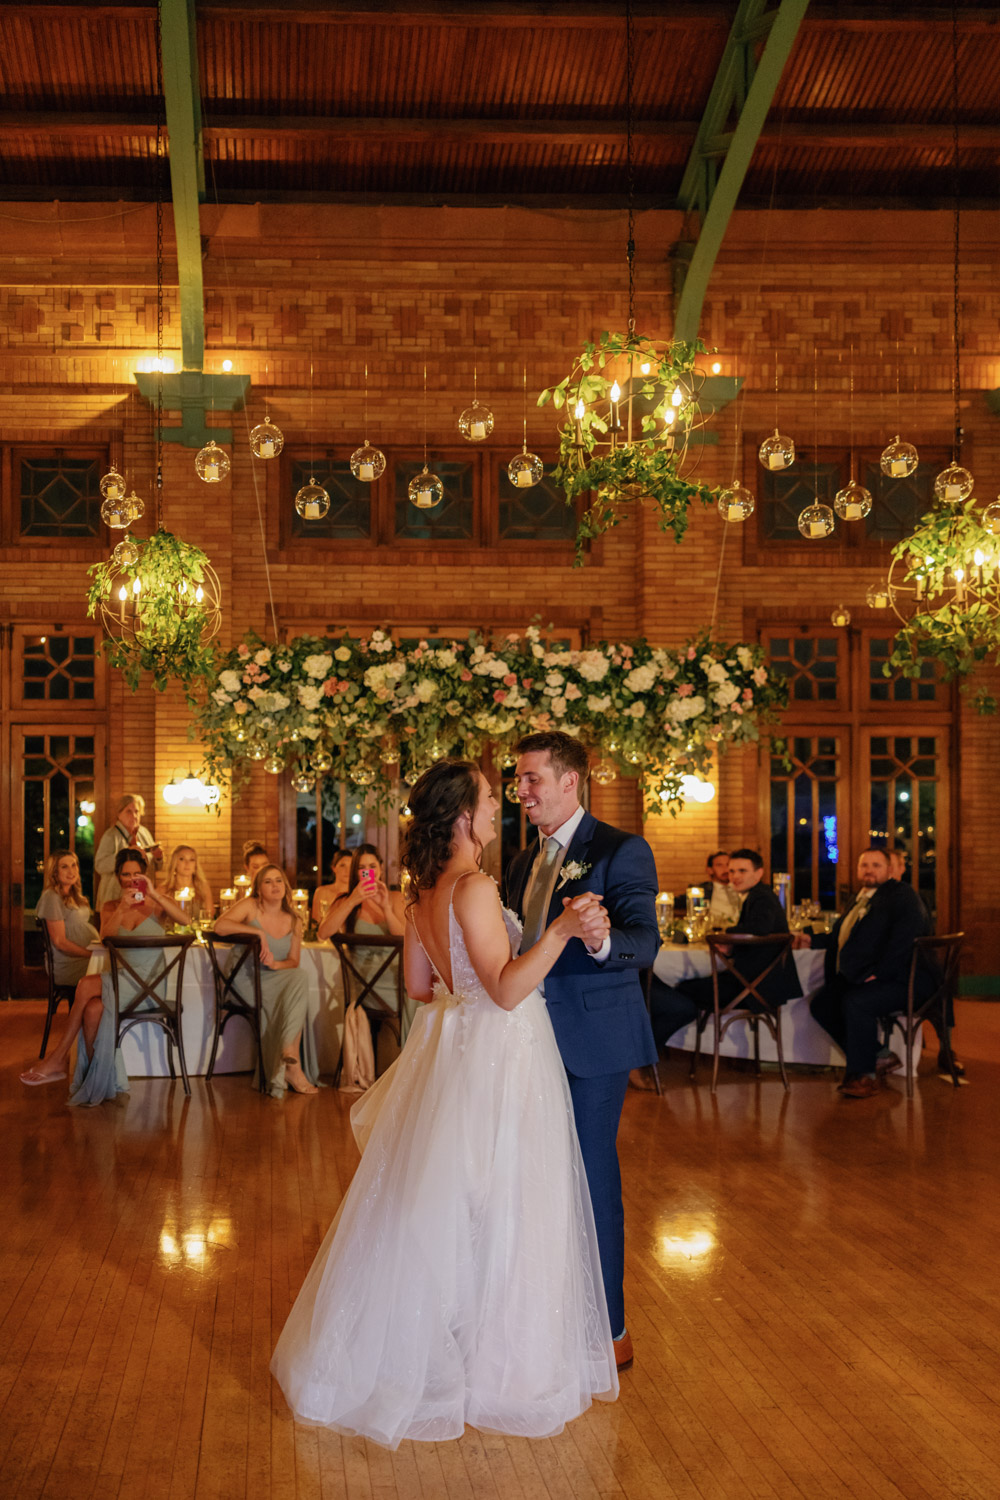 First dance photos at Cafe Brauer in Chicago